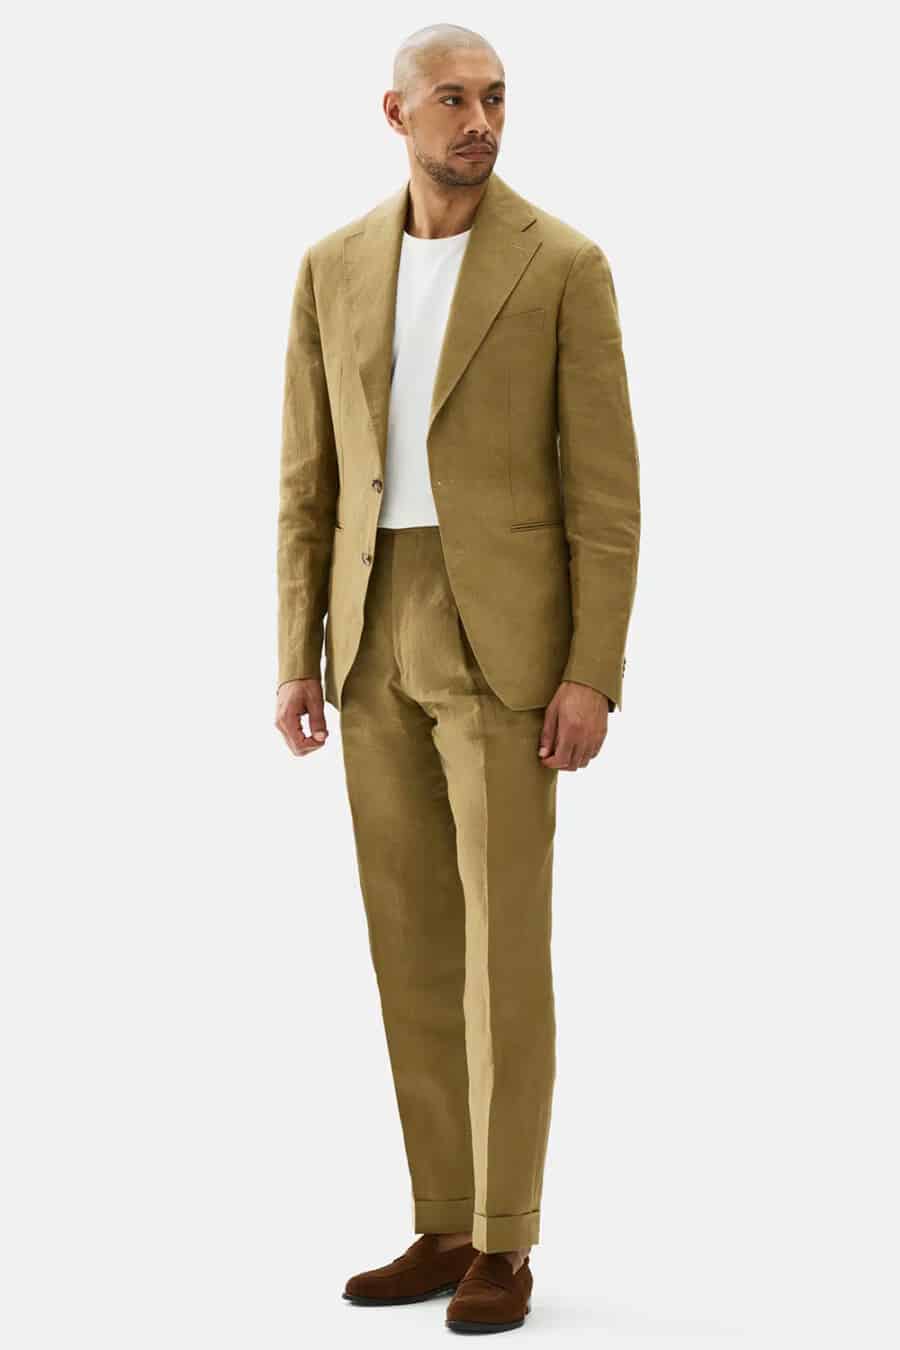 Men's khaki suit, white T-shirt and brown suede penny loafers outfit